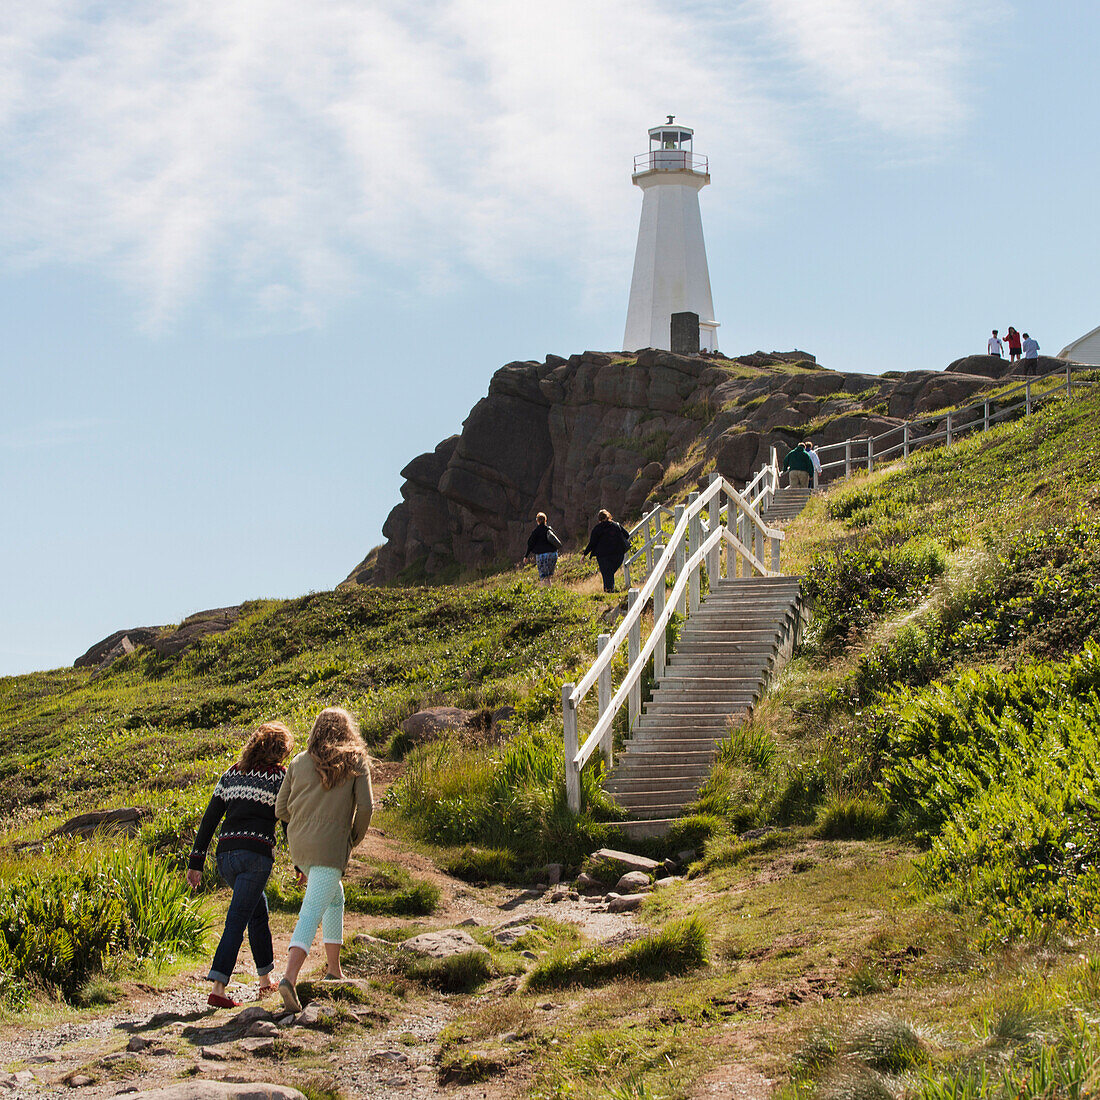 'Tourists walking to steps leading up to a lighthouse on Cape Spear; St. John's, Newfoundland and Labrador, Canada'